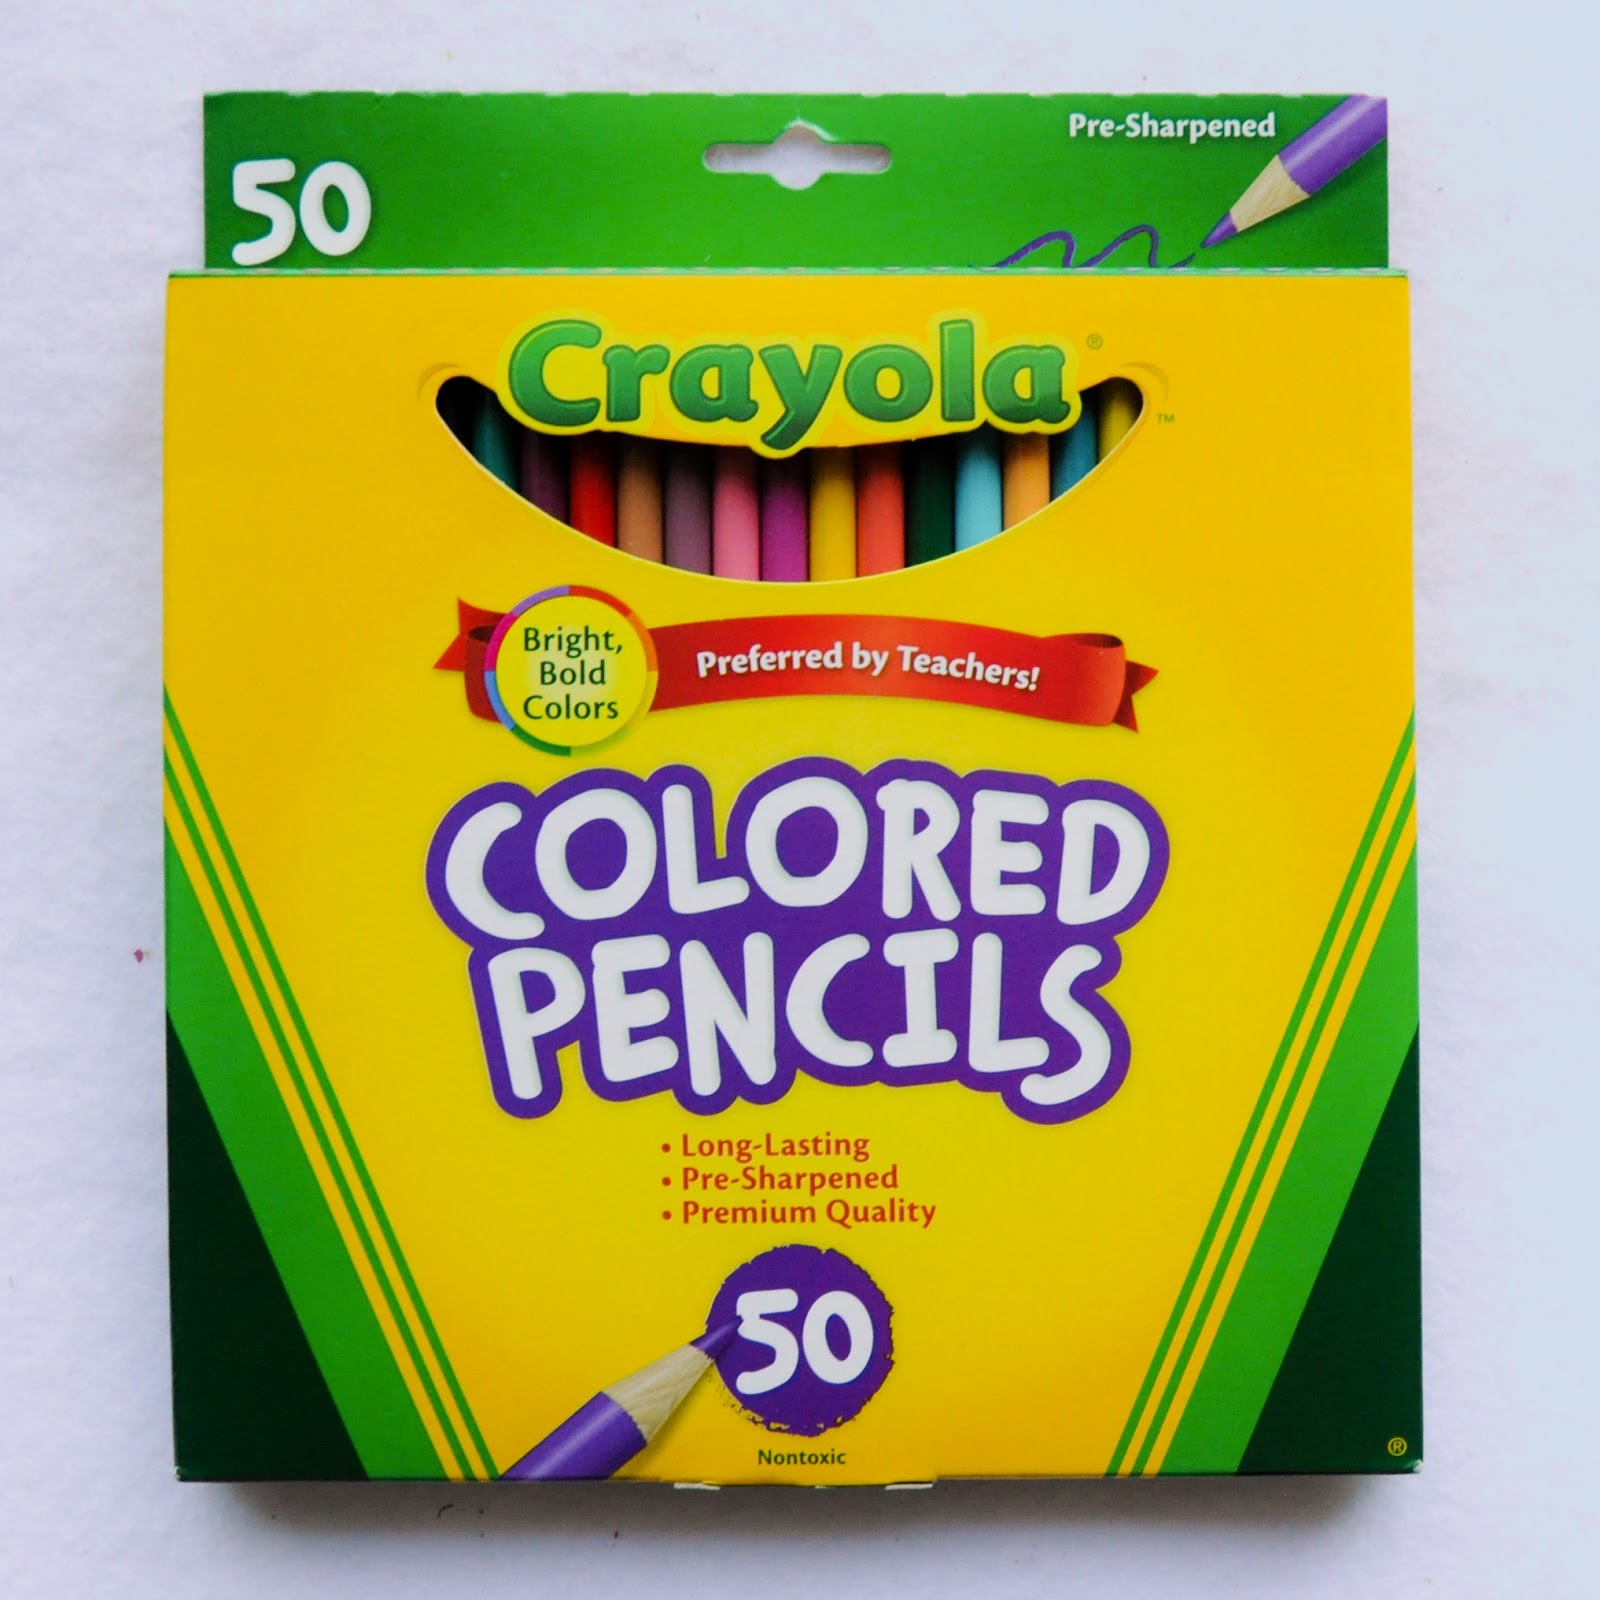 Did you have the 50 colored pencils? #crayola #colors